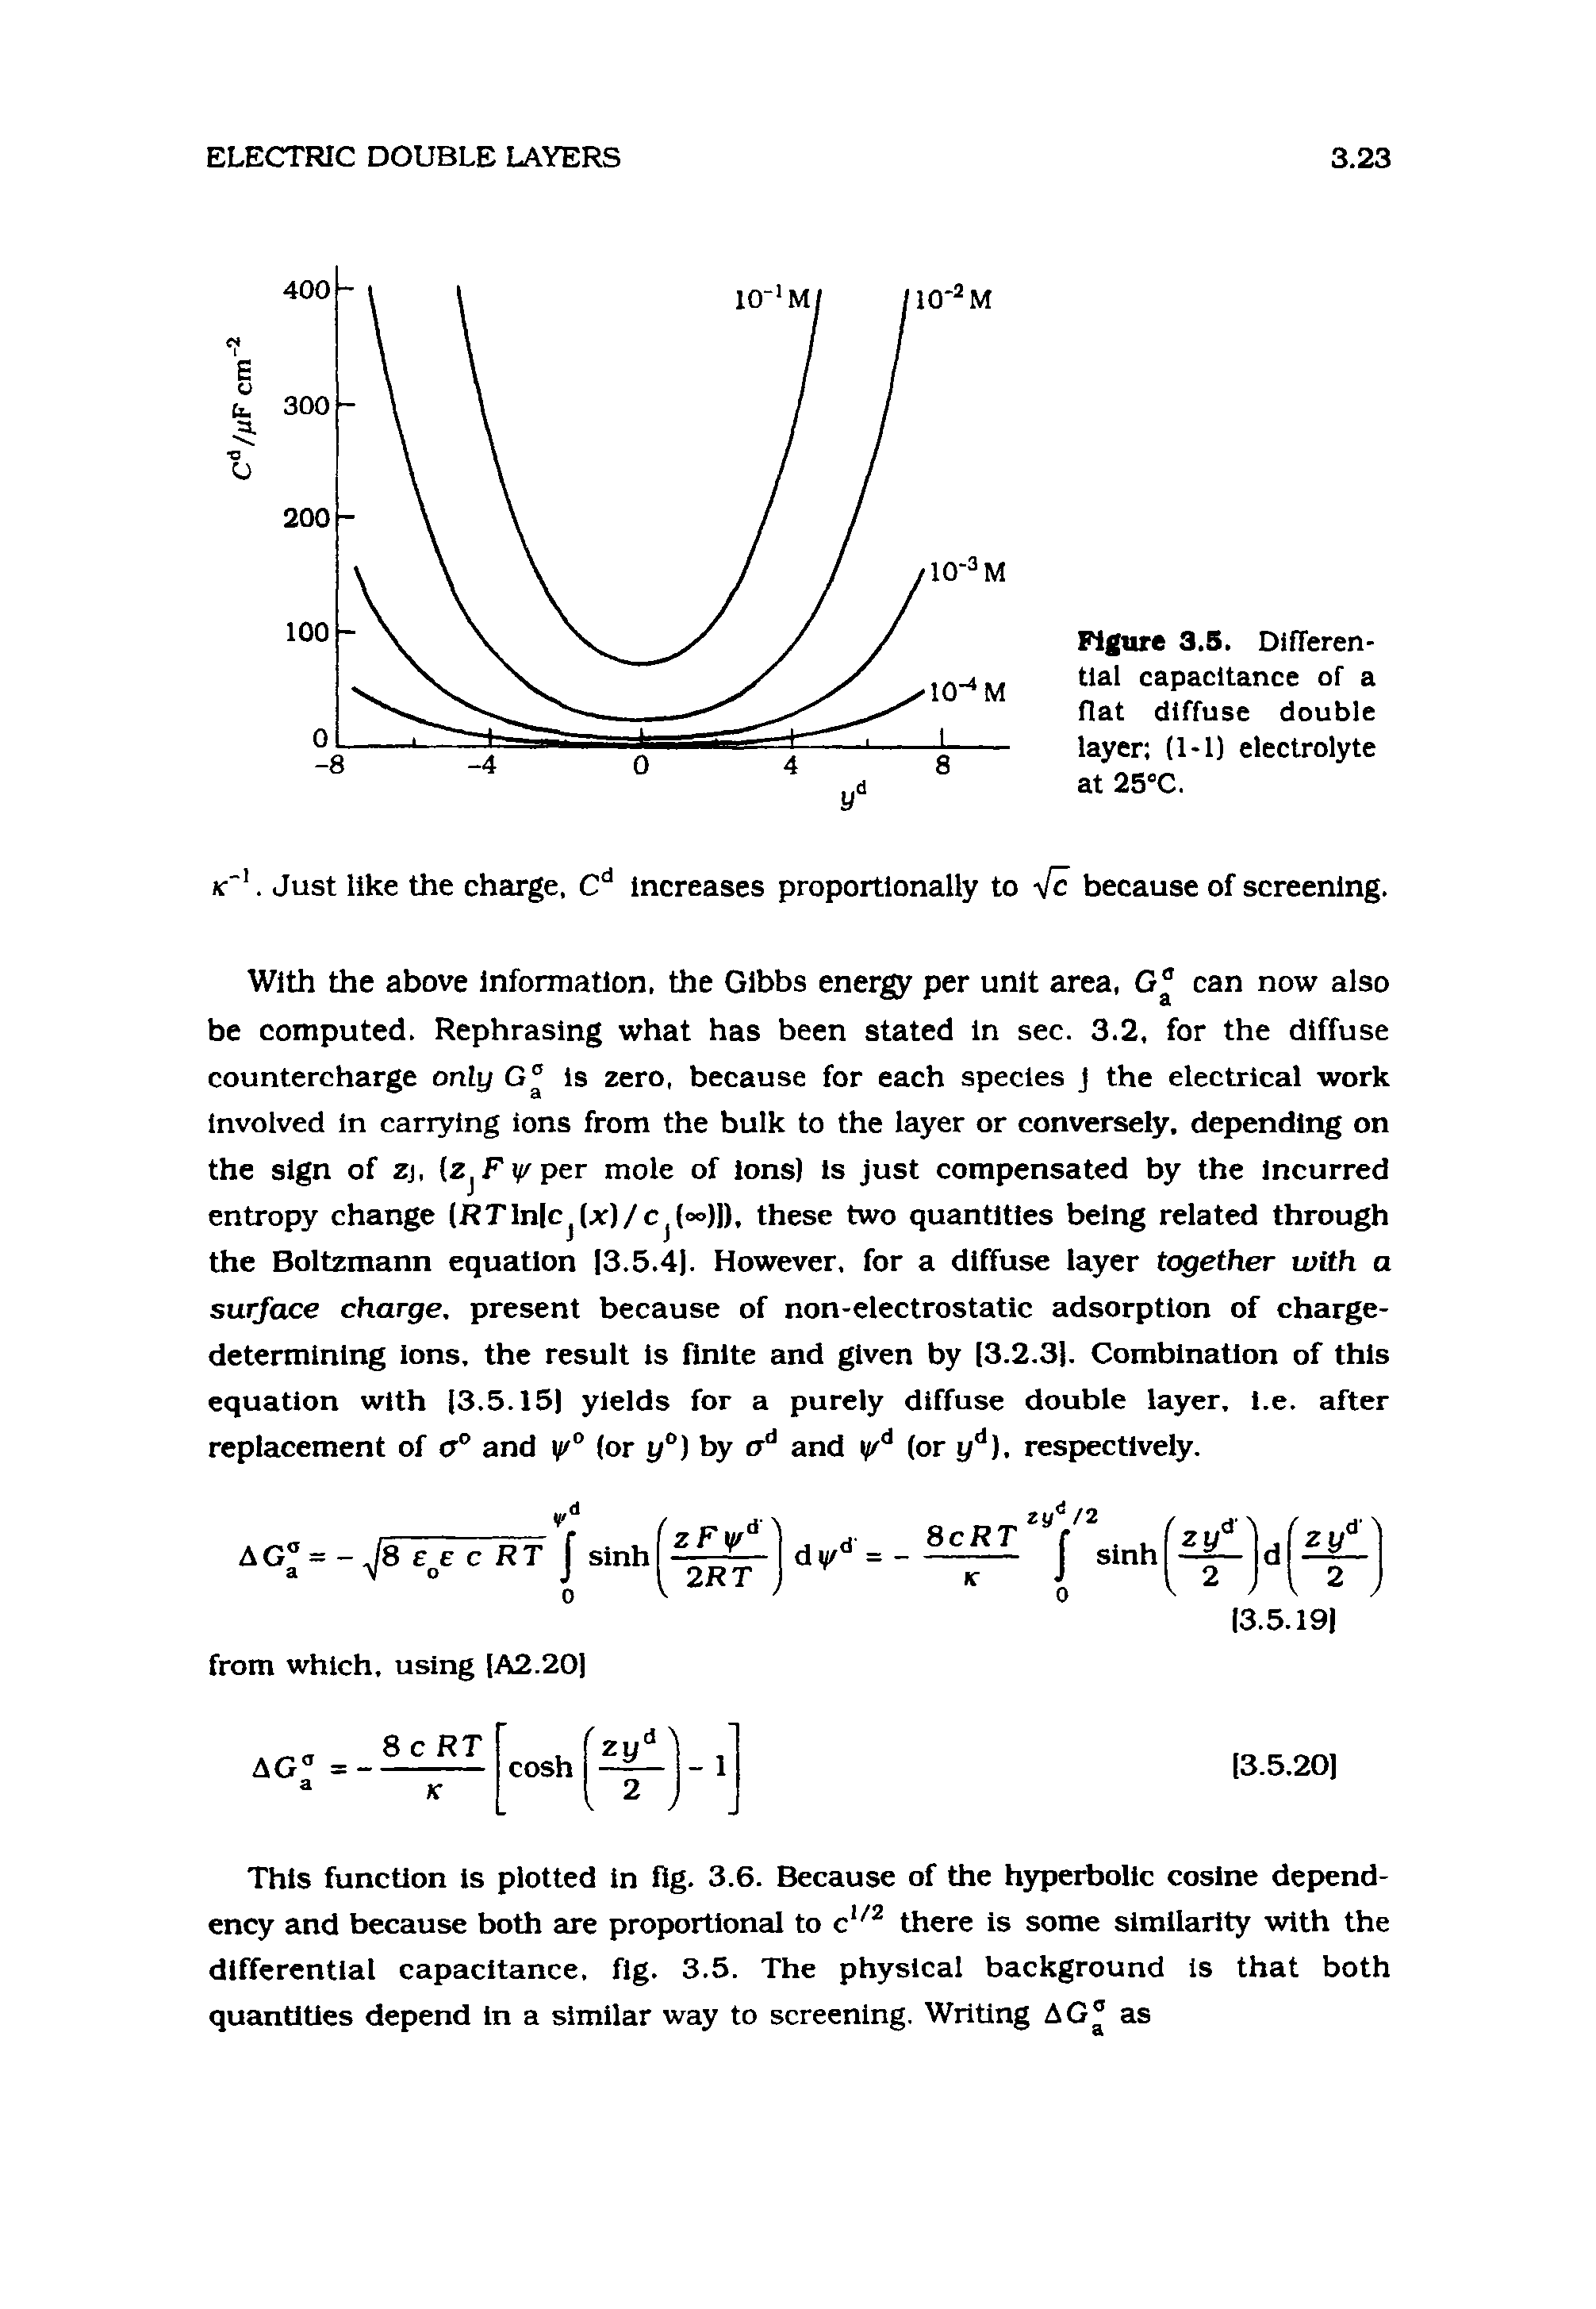 Figure 3.5. Difleren-tlal capacitance of a flat diffuse double layer (1-1) electrolyte at 25°C.